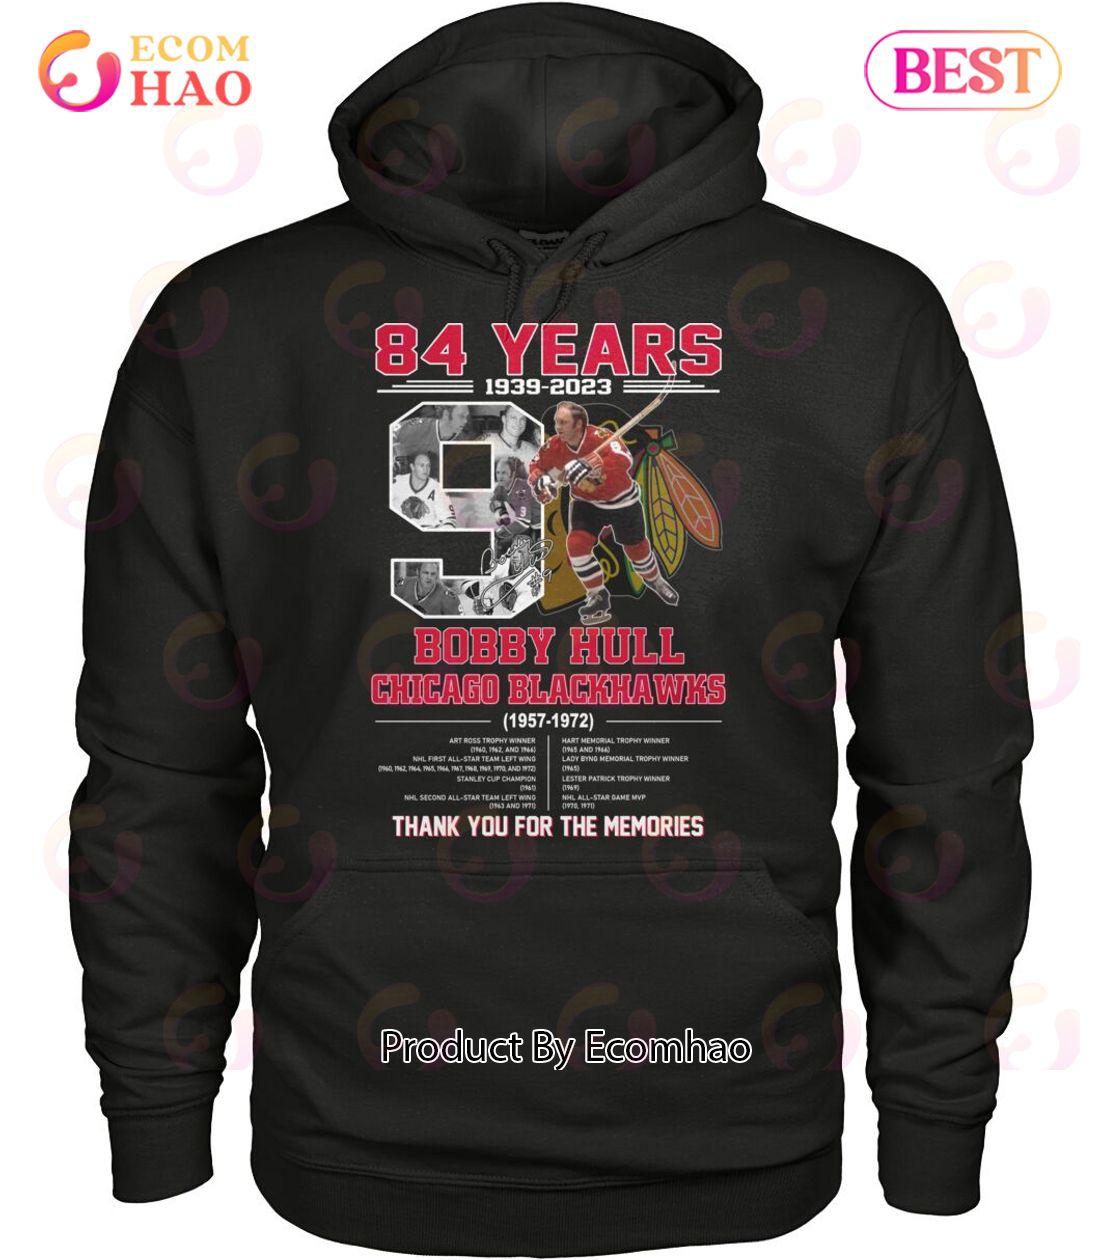 84 Years 1939 - 2023 Bobby Hull Chicago Blackhawks 1957 - 1972 Thank You For The Memories T-Shirt